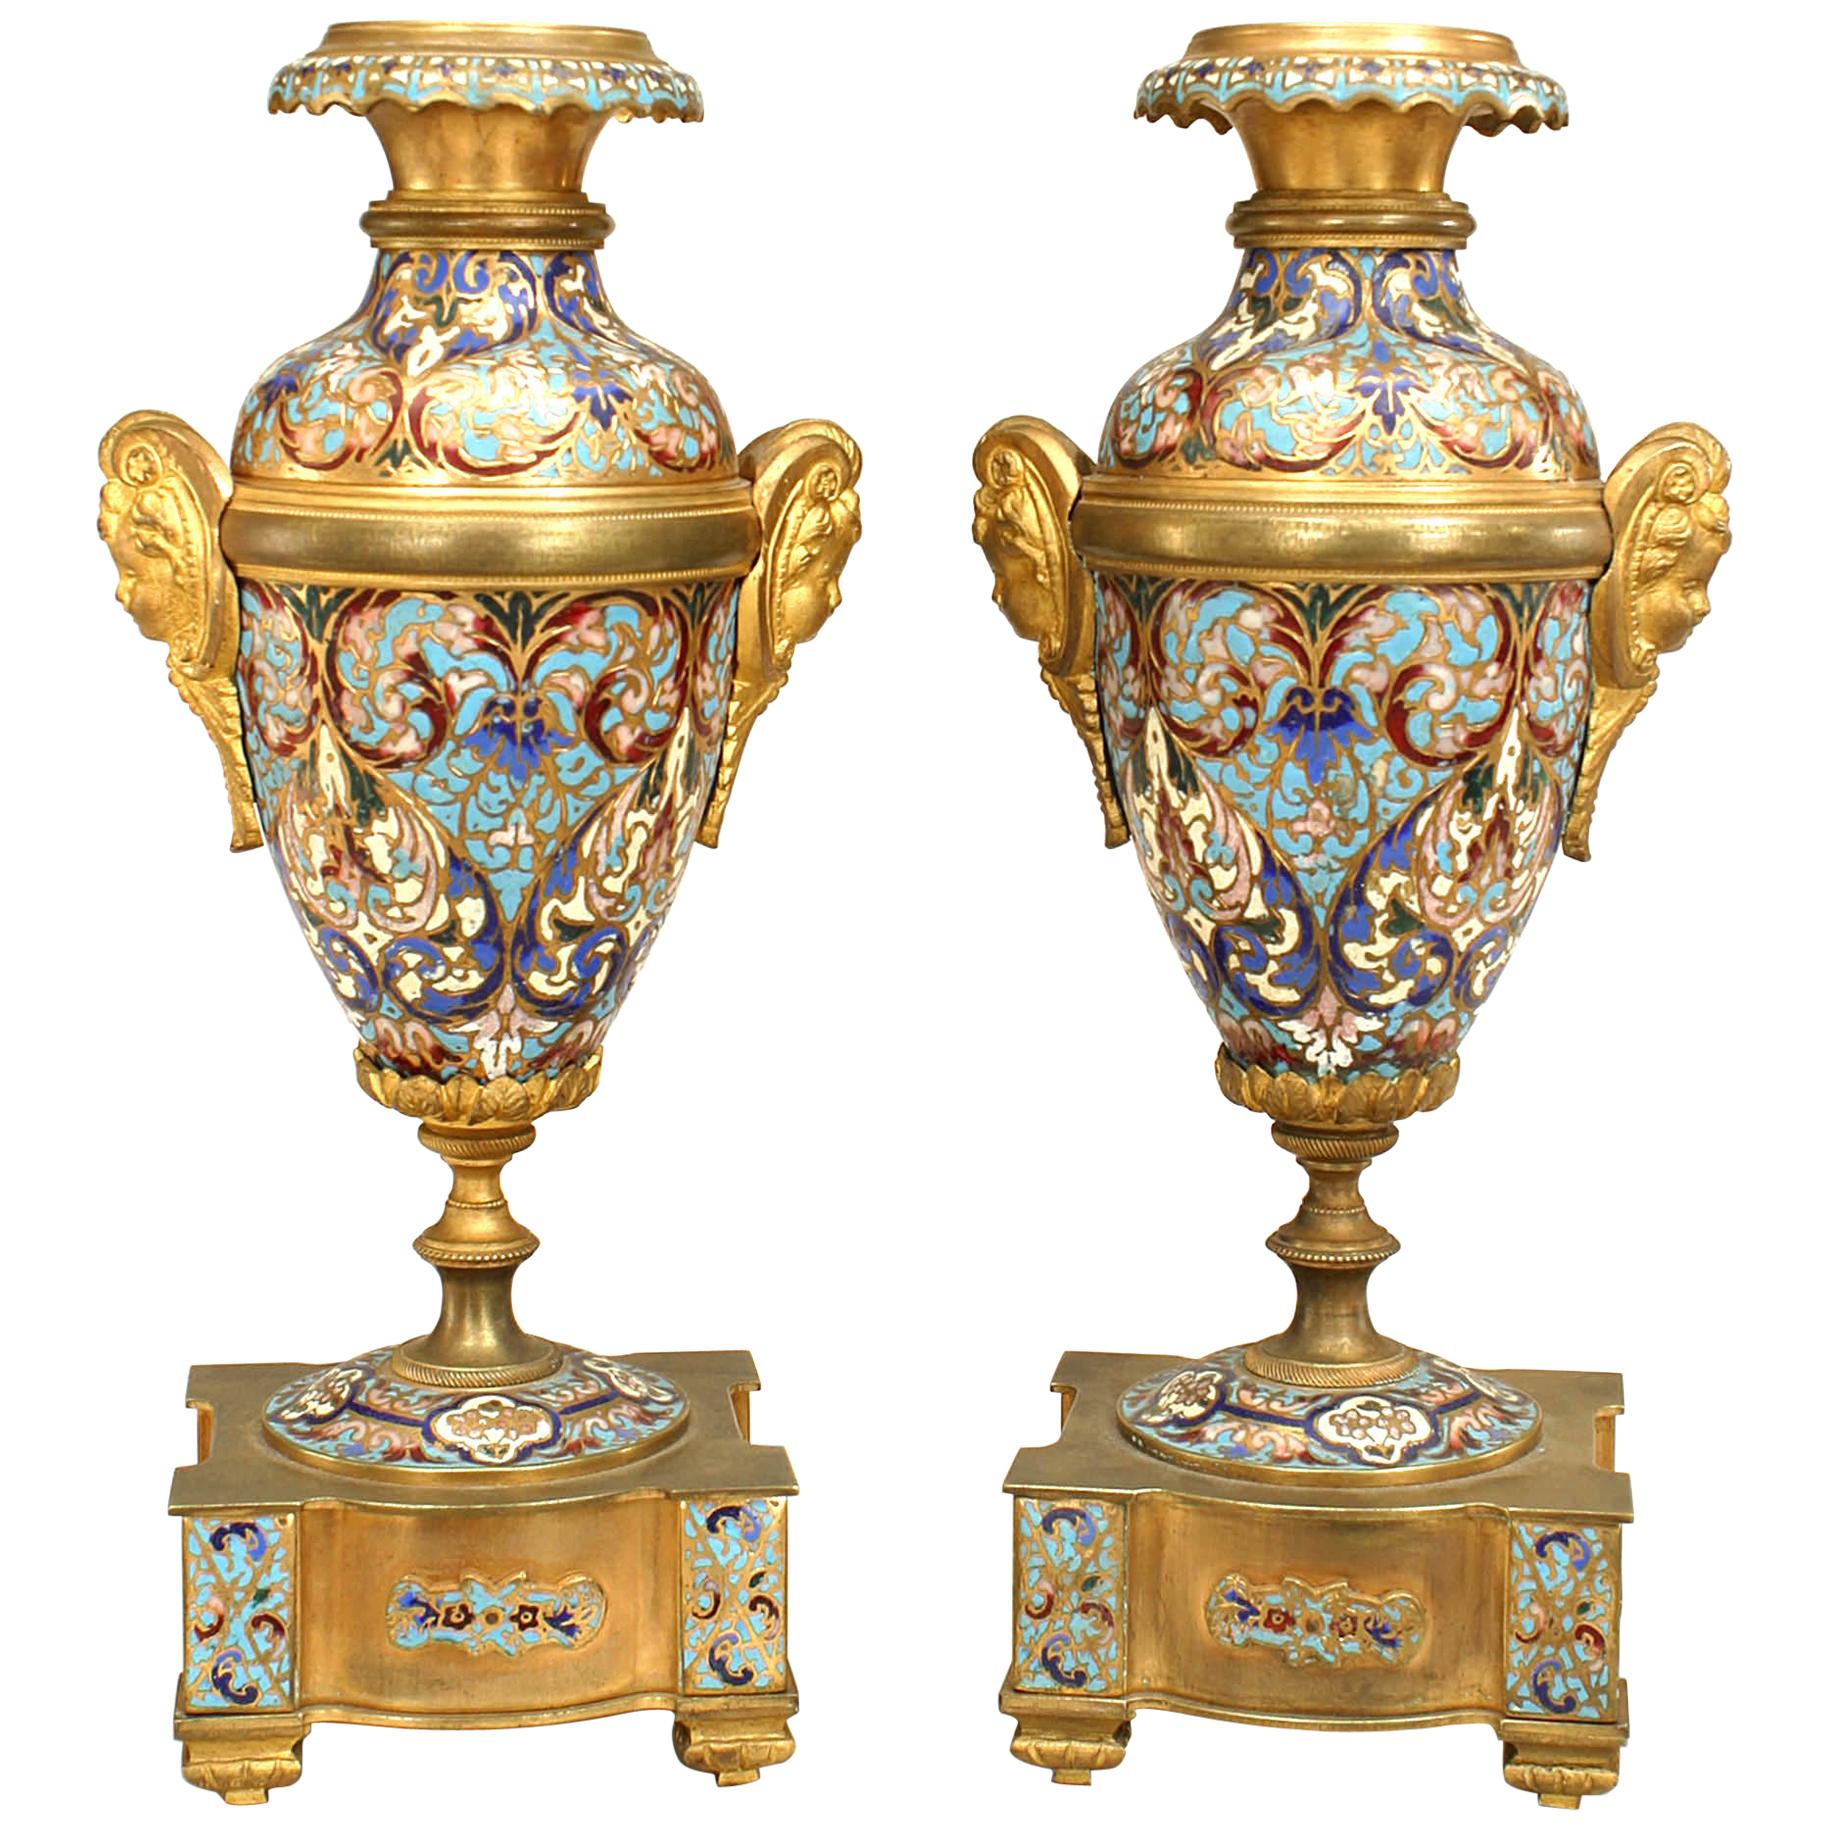 Pair of French Victorian Enamel and Gilt Bronze Urn Vases